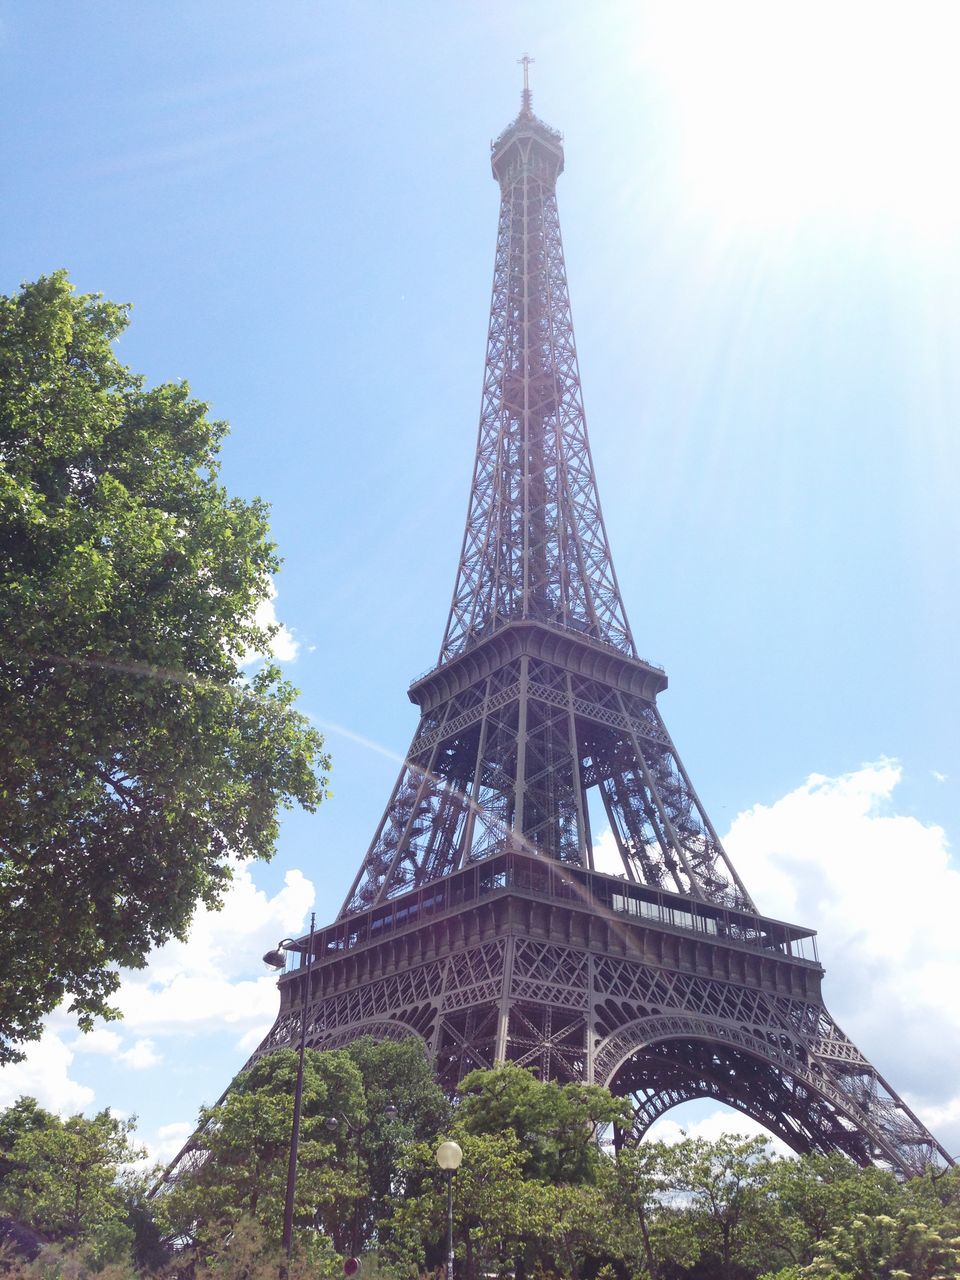 eiffel tower, famous place, international landmark, architecture, travel destinations, tourism, built structure, tower, travel, culture, tall - high, capital cities, low angle view, history, sky, tree, architectural feature, metal, city, building exterior